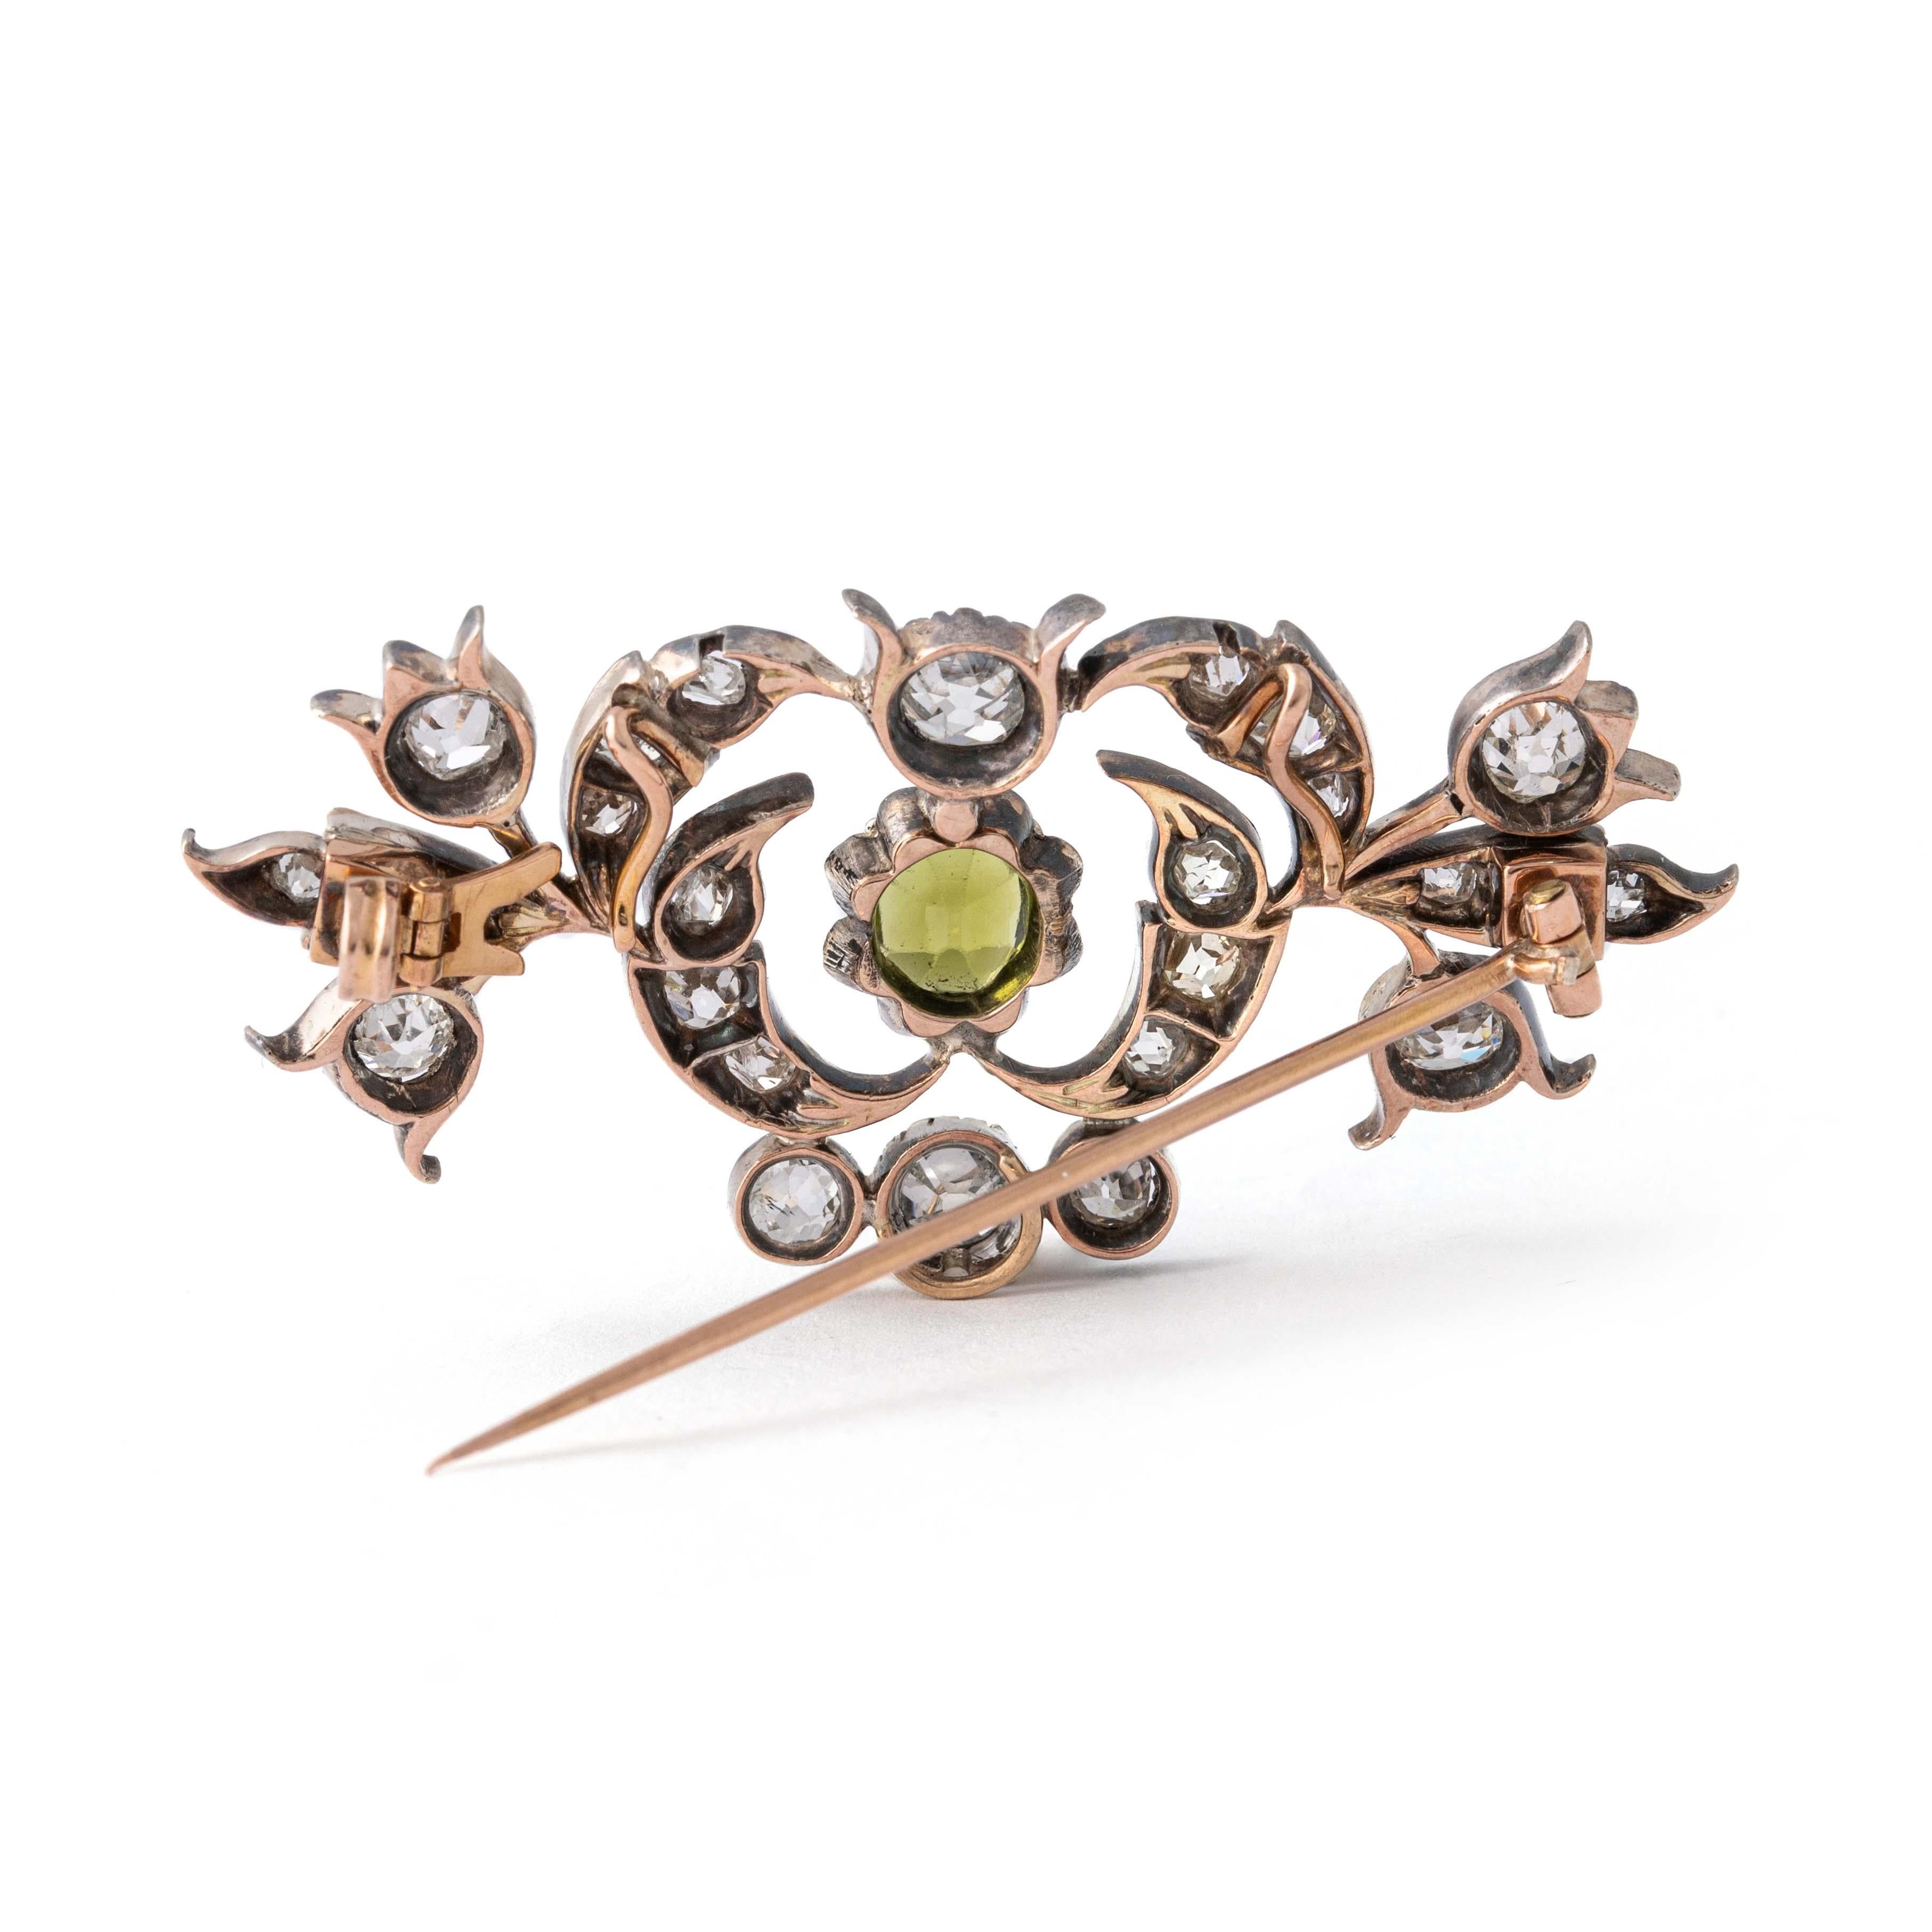 Antique Diamond and Peridot Brooch Pendant Late 19th Century For Sale 1